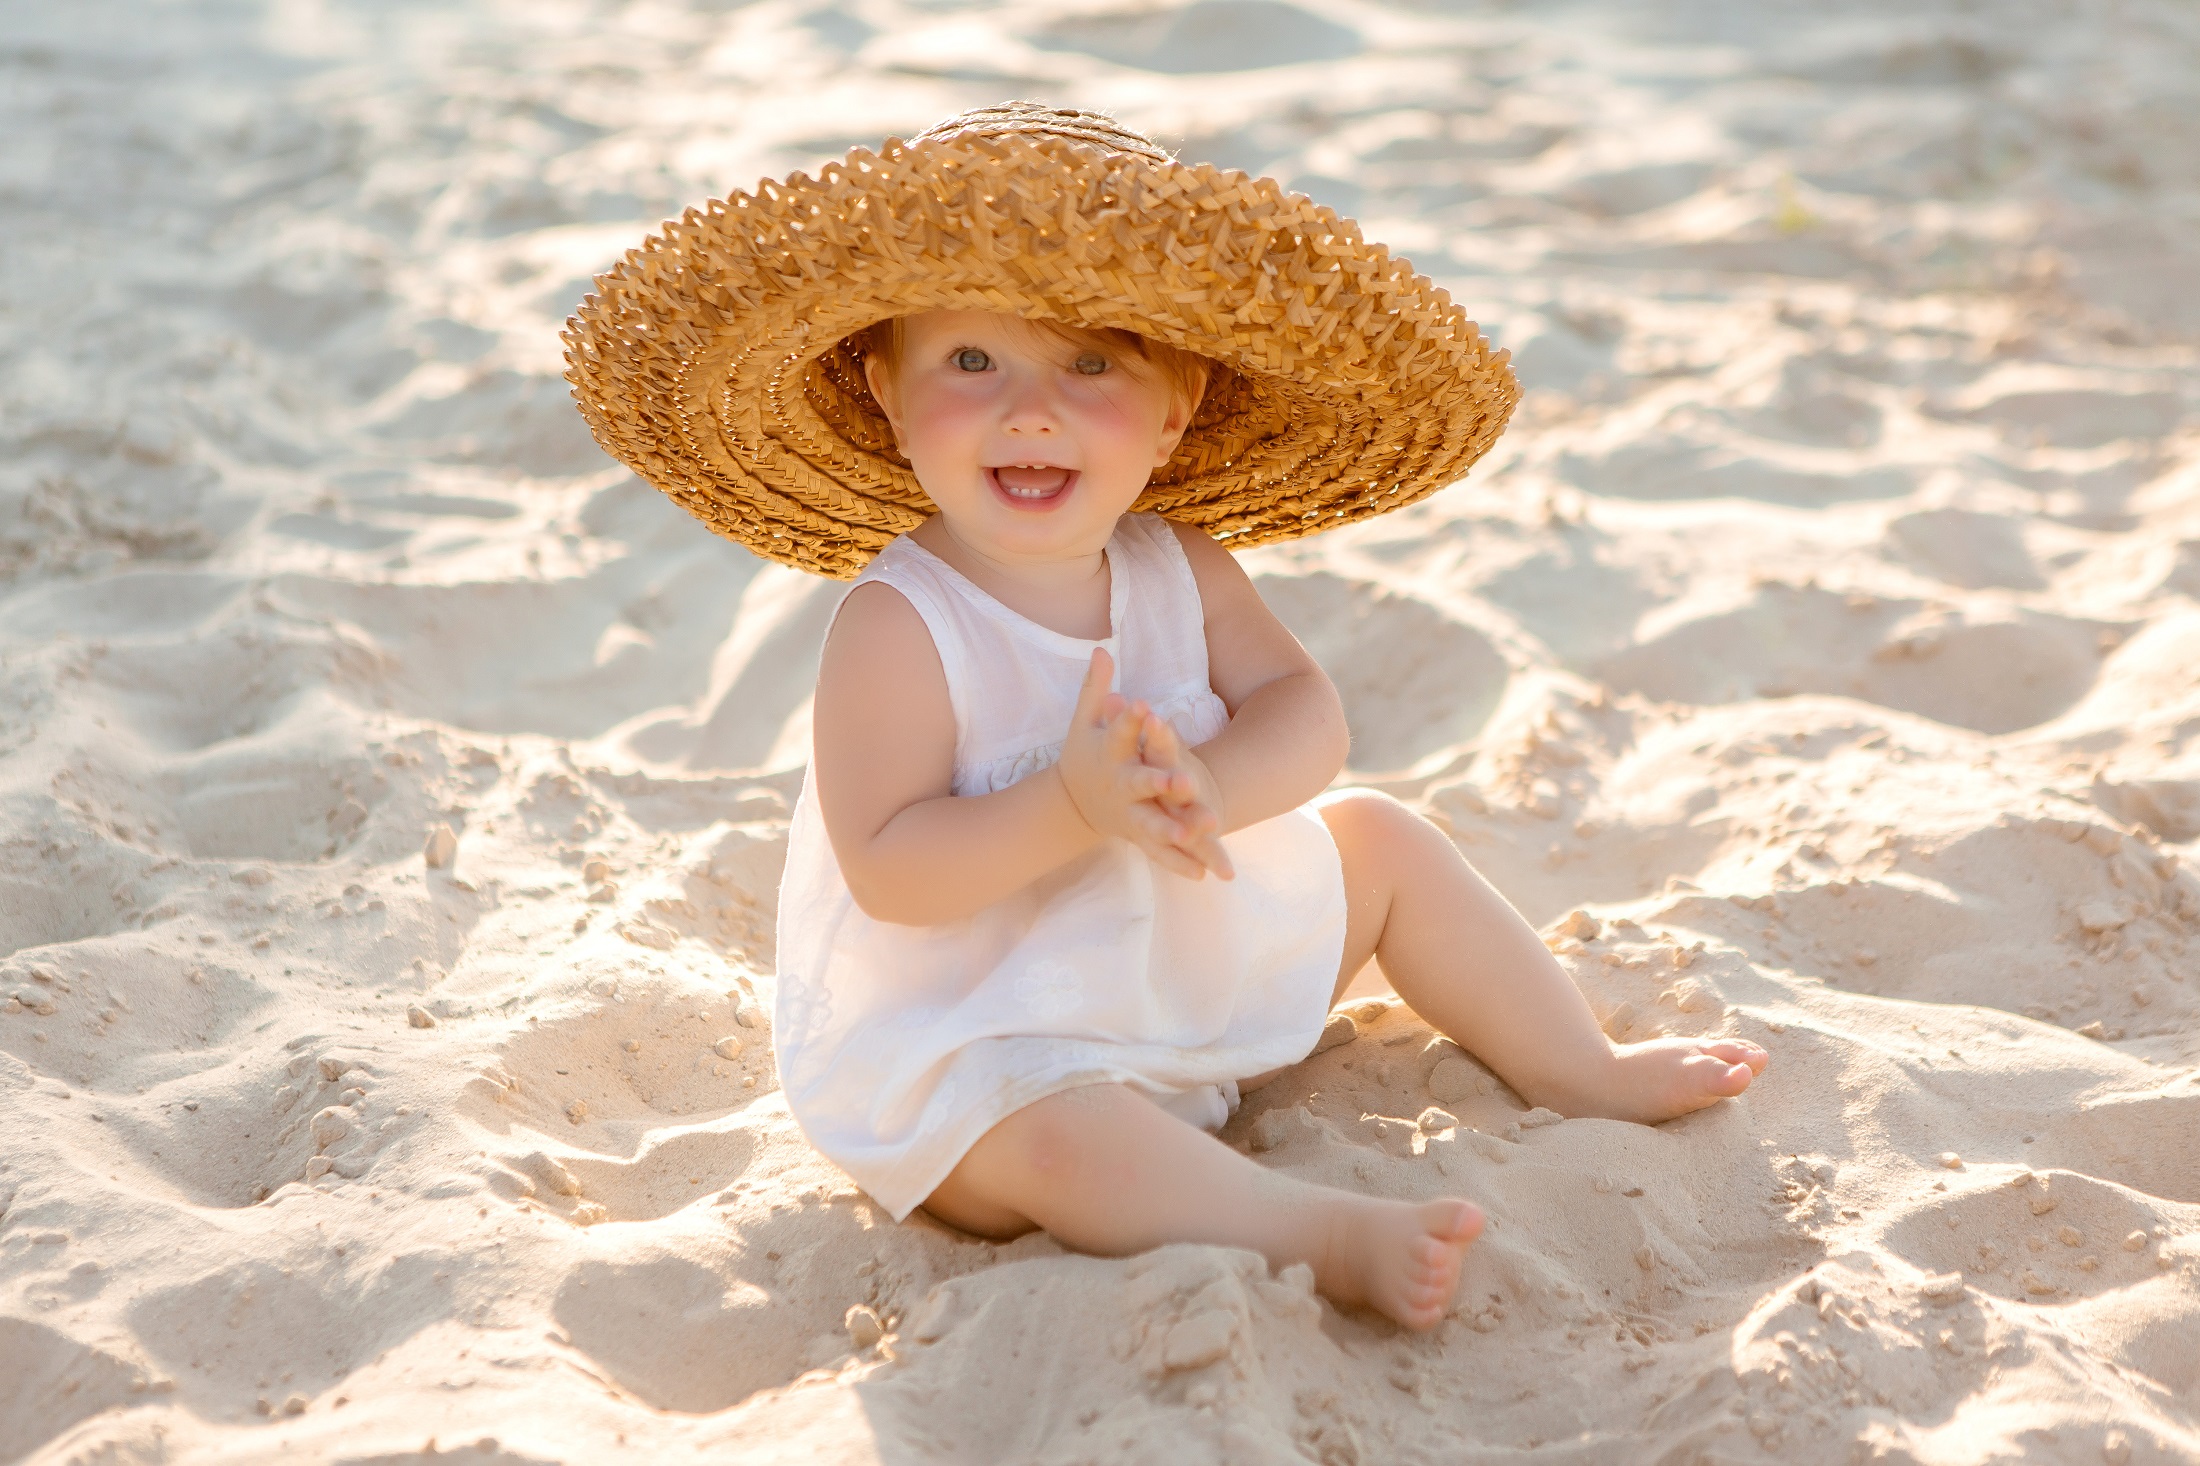 How should a child be dressed in the summer?